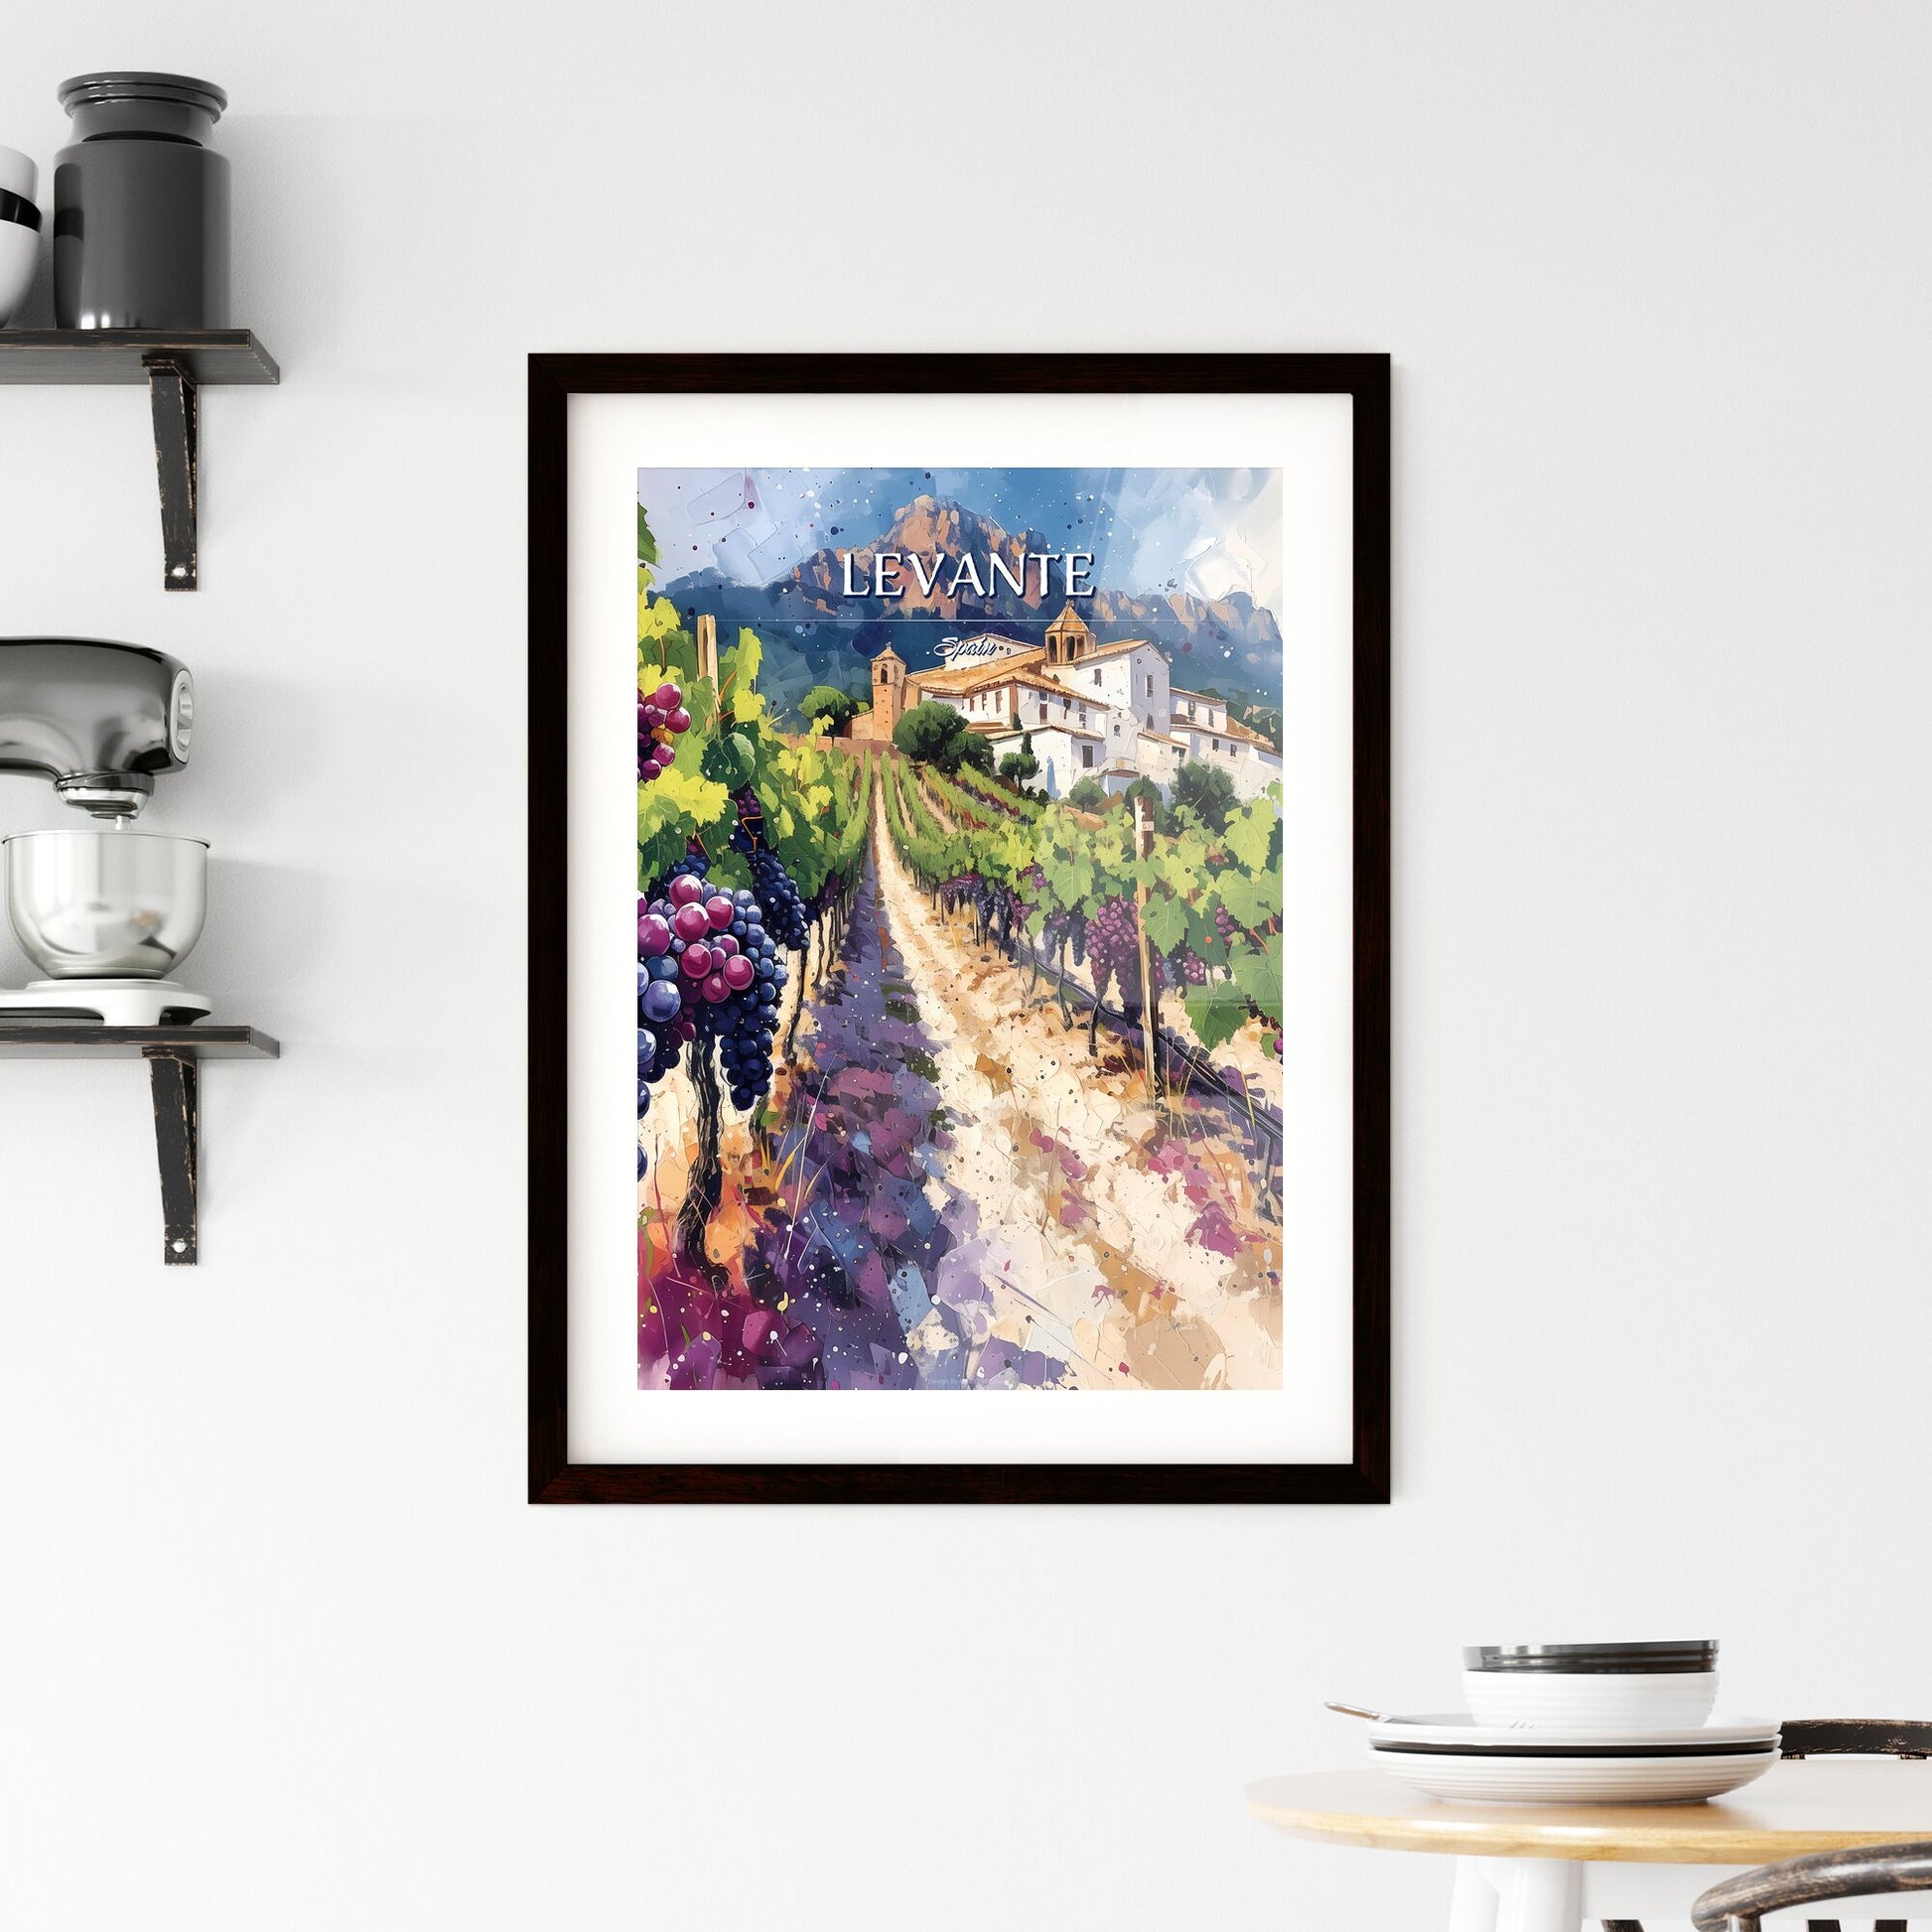 Levante, Spain - Art print of a painting of a vineyard with grapes Default Title